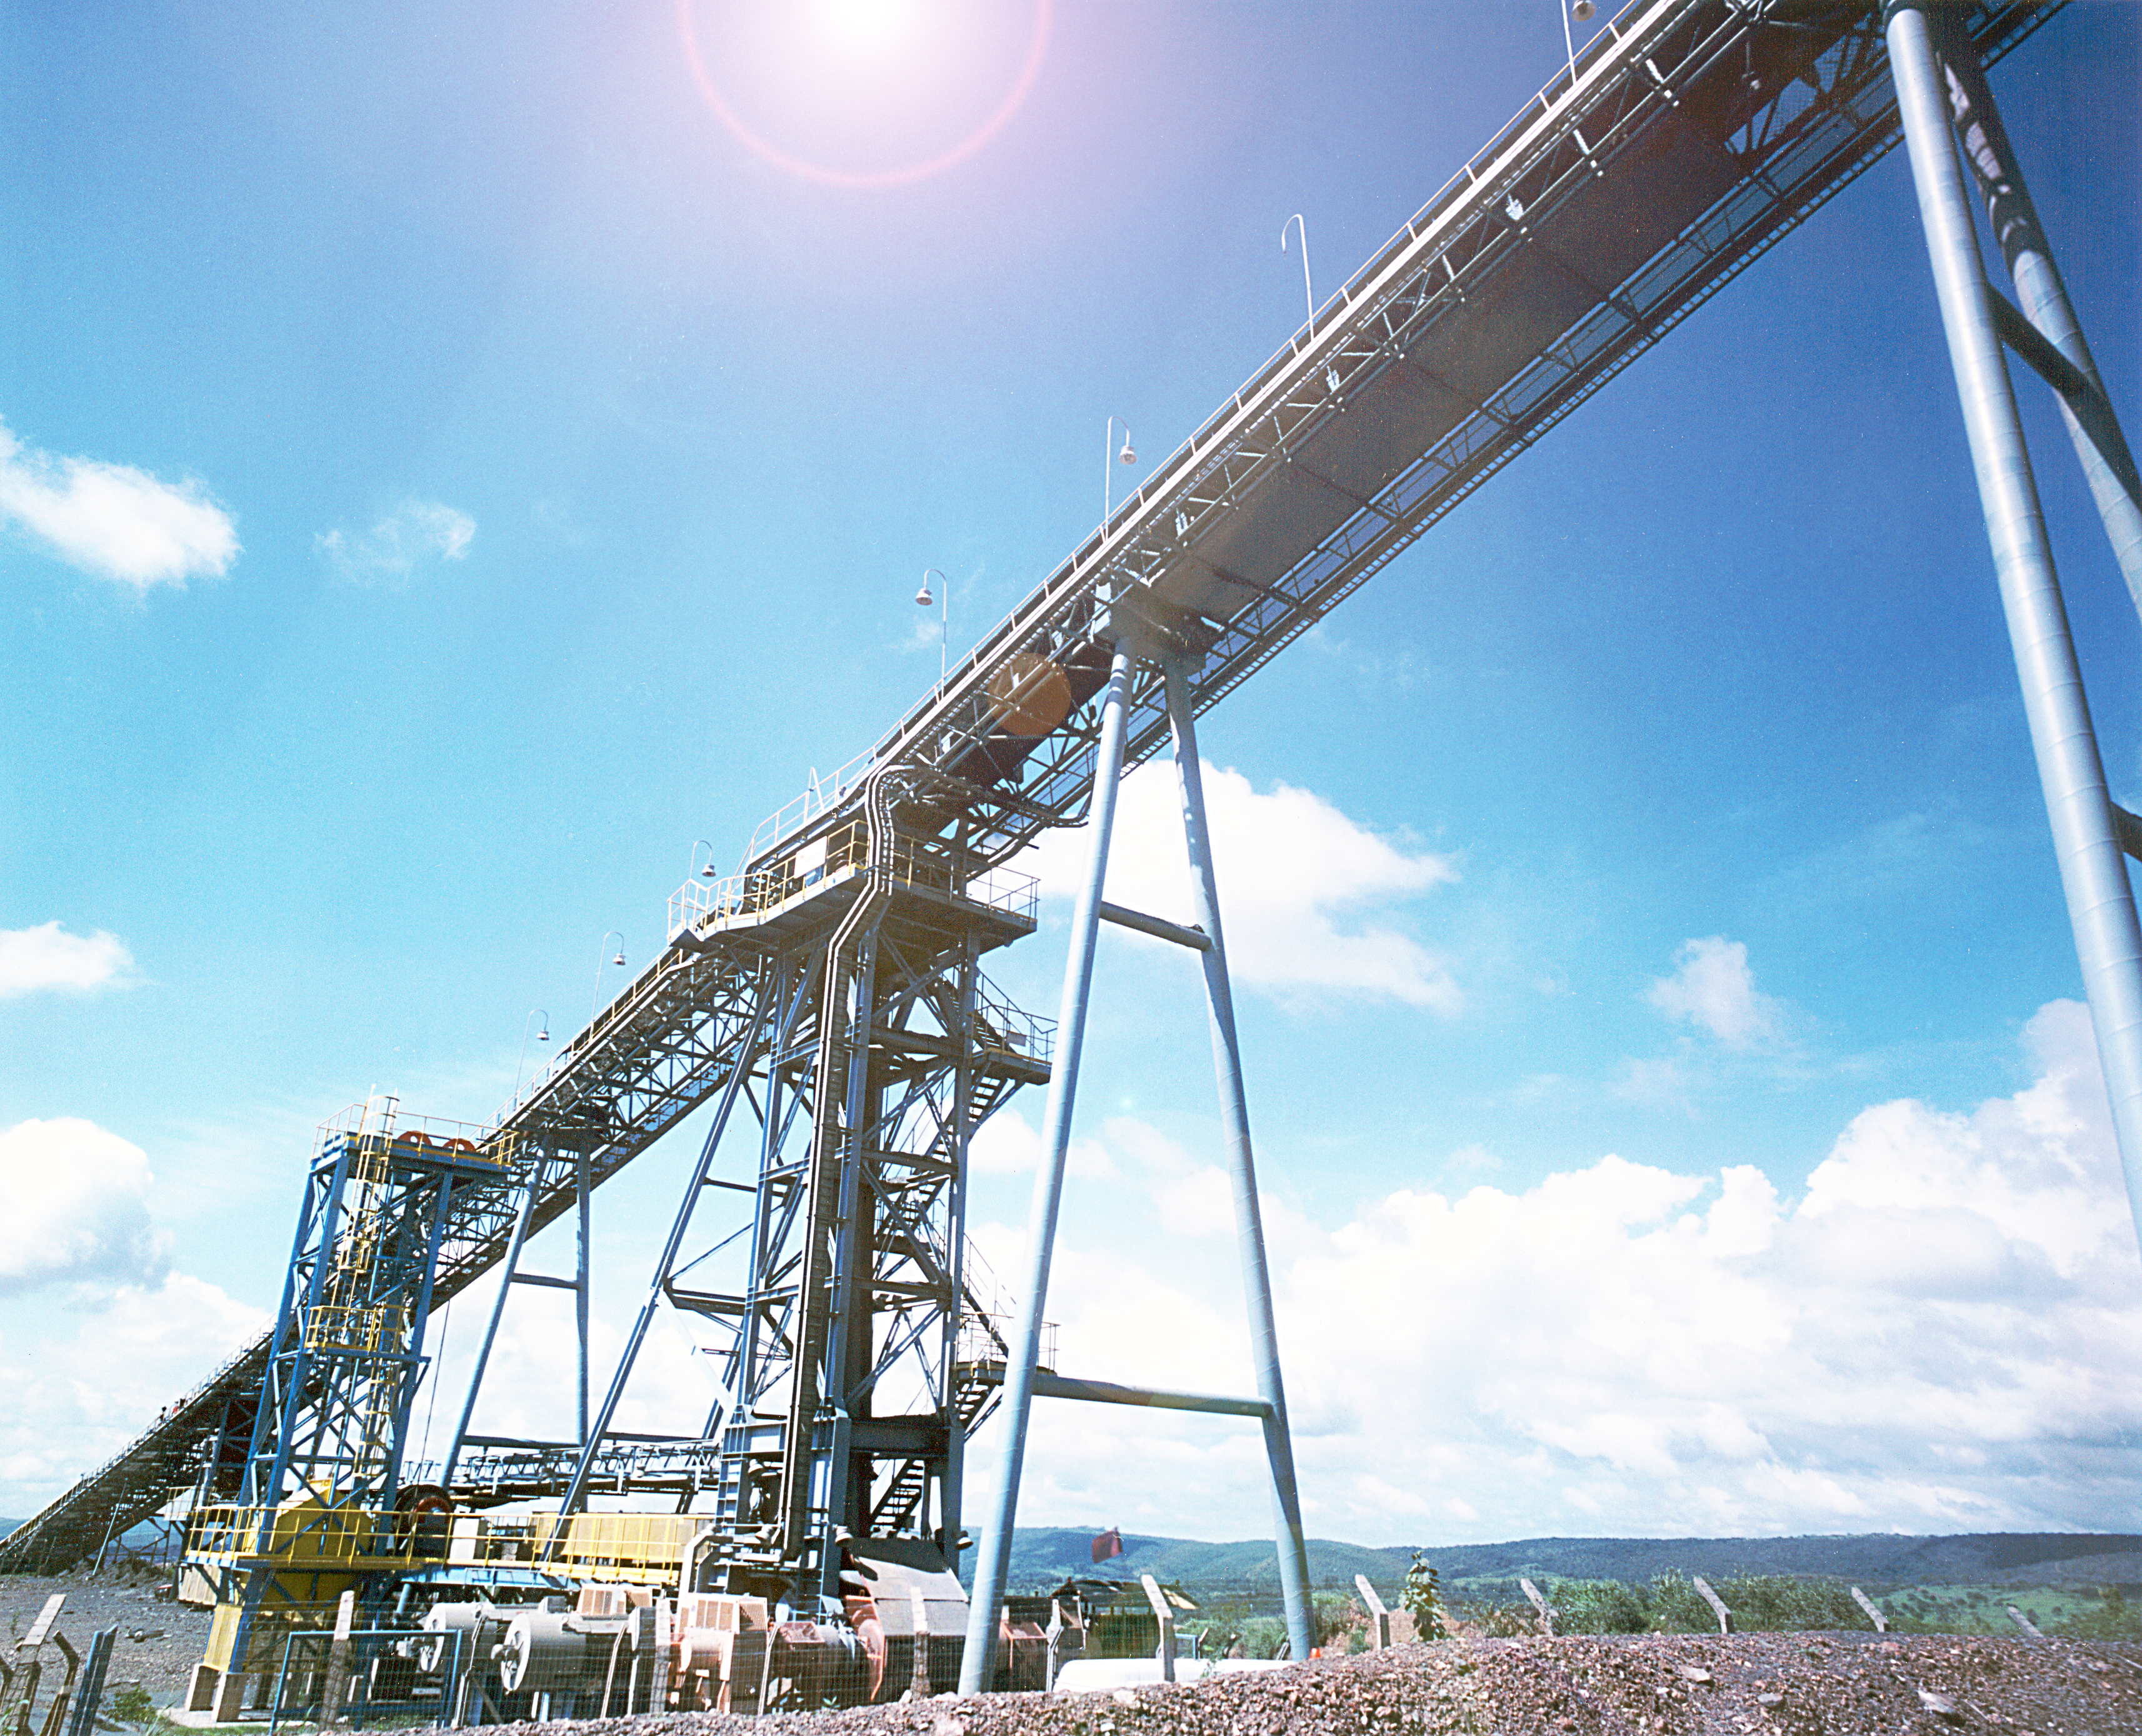 Metso overland conveyors for mining provide a viable solution for long distant material transportation